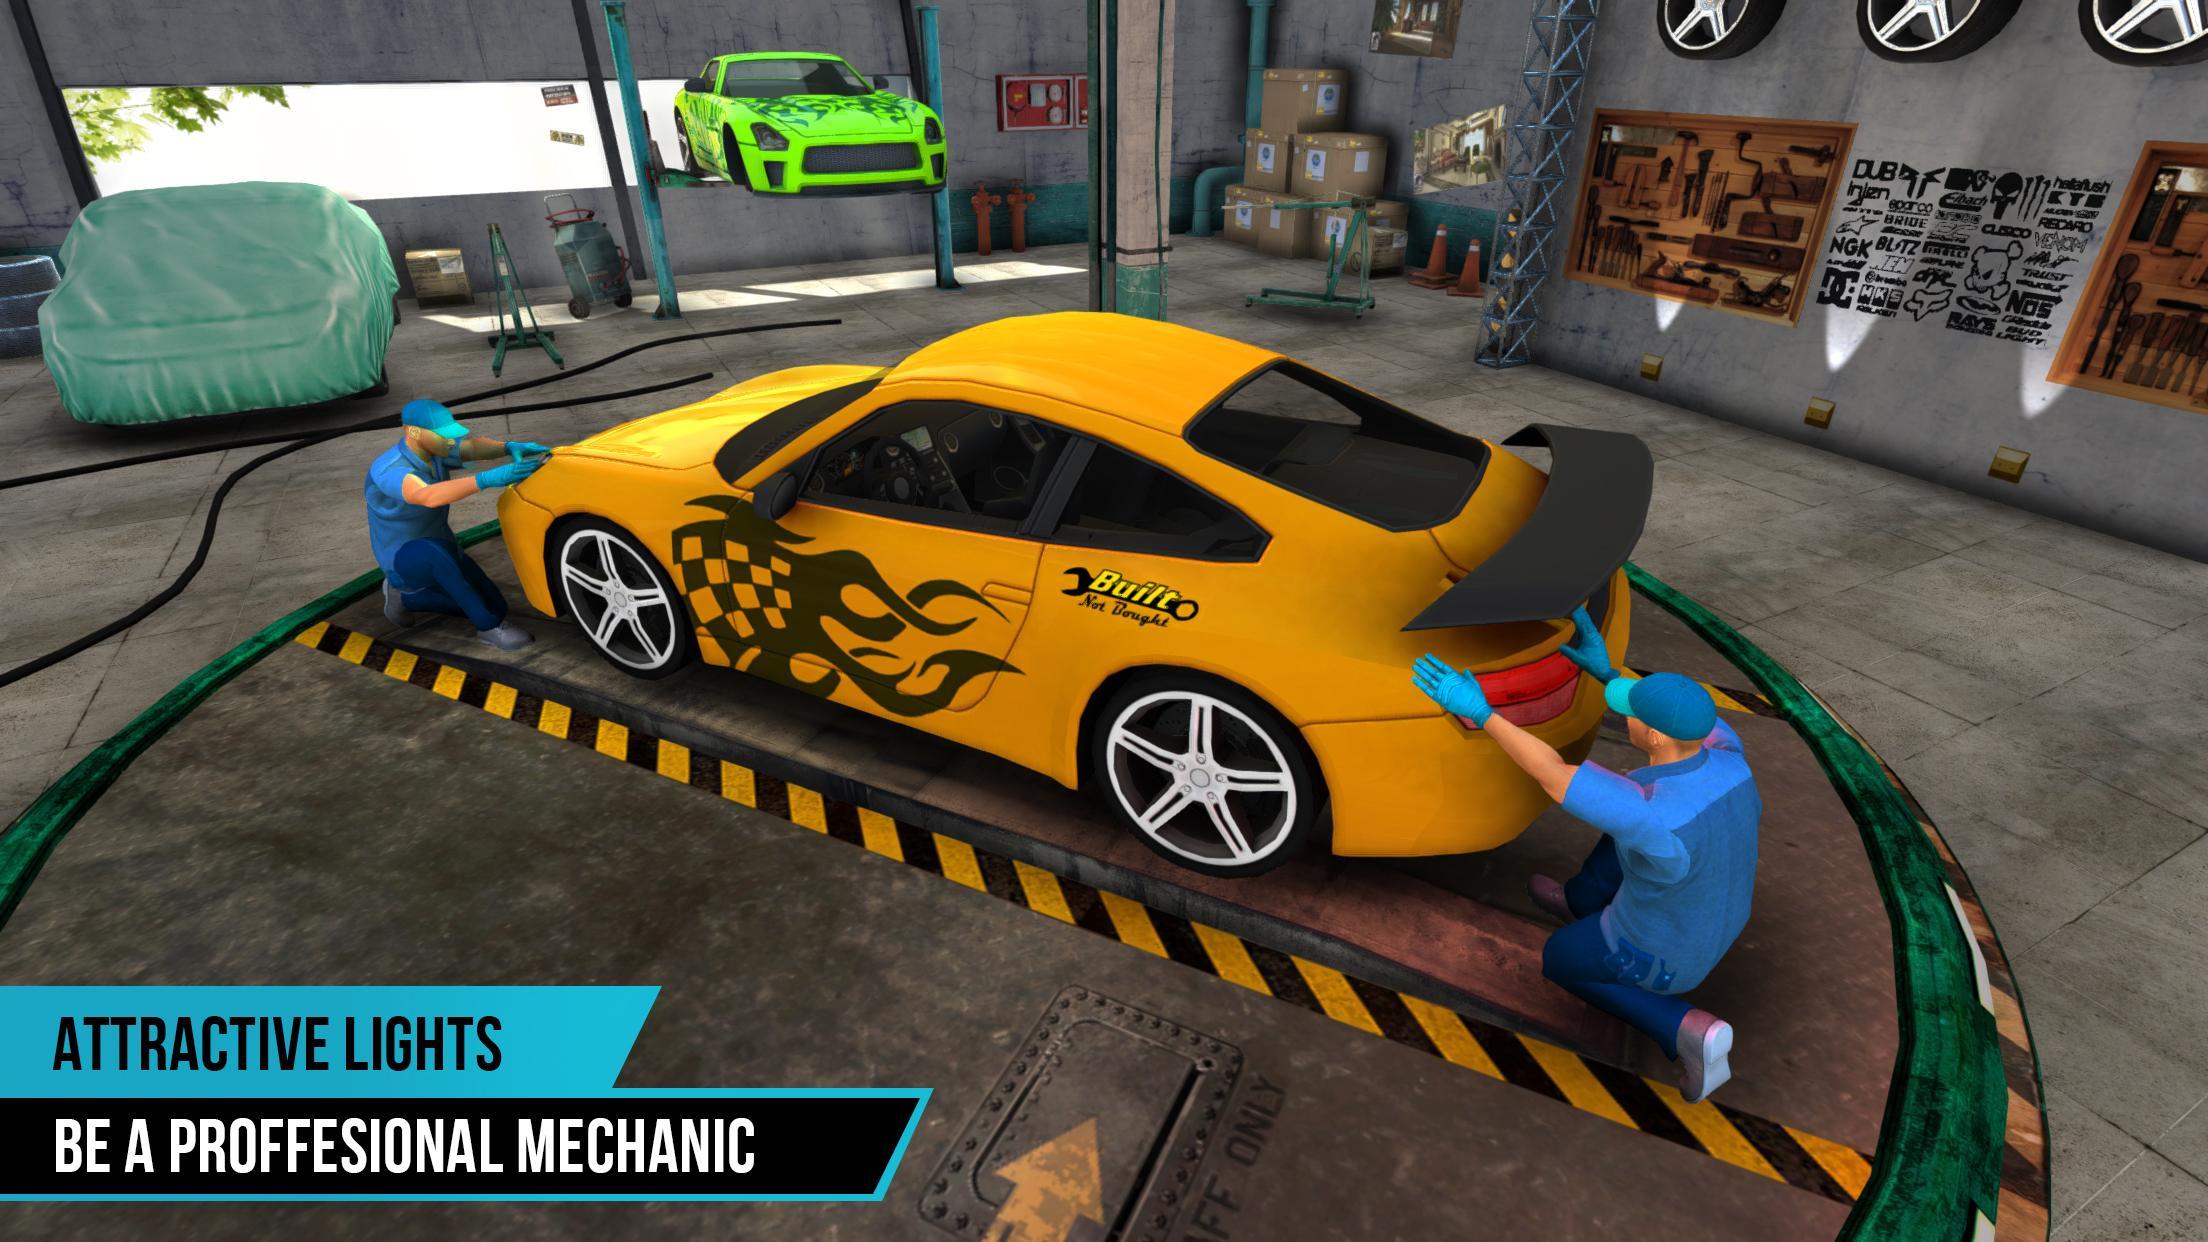 Mobil Mechanic Game Simulator For Android Apk Download